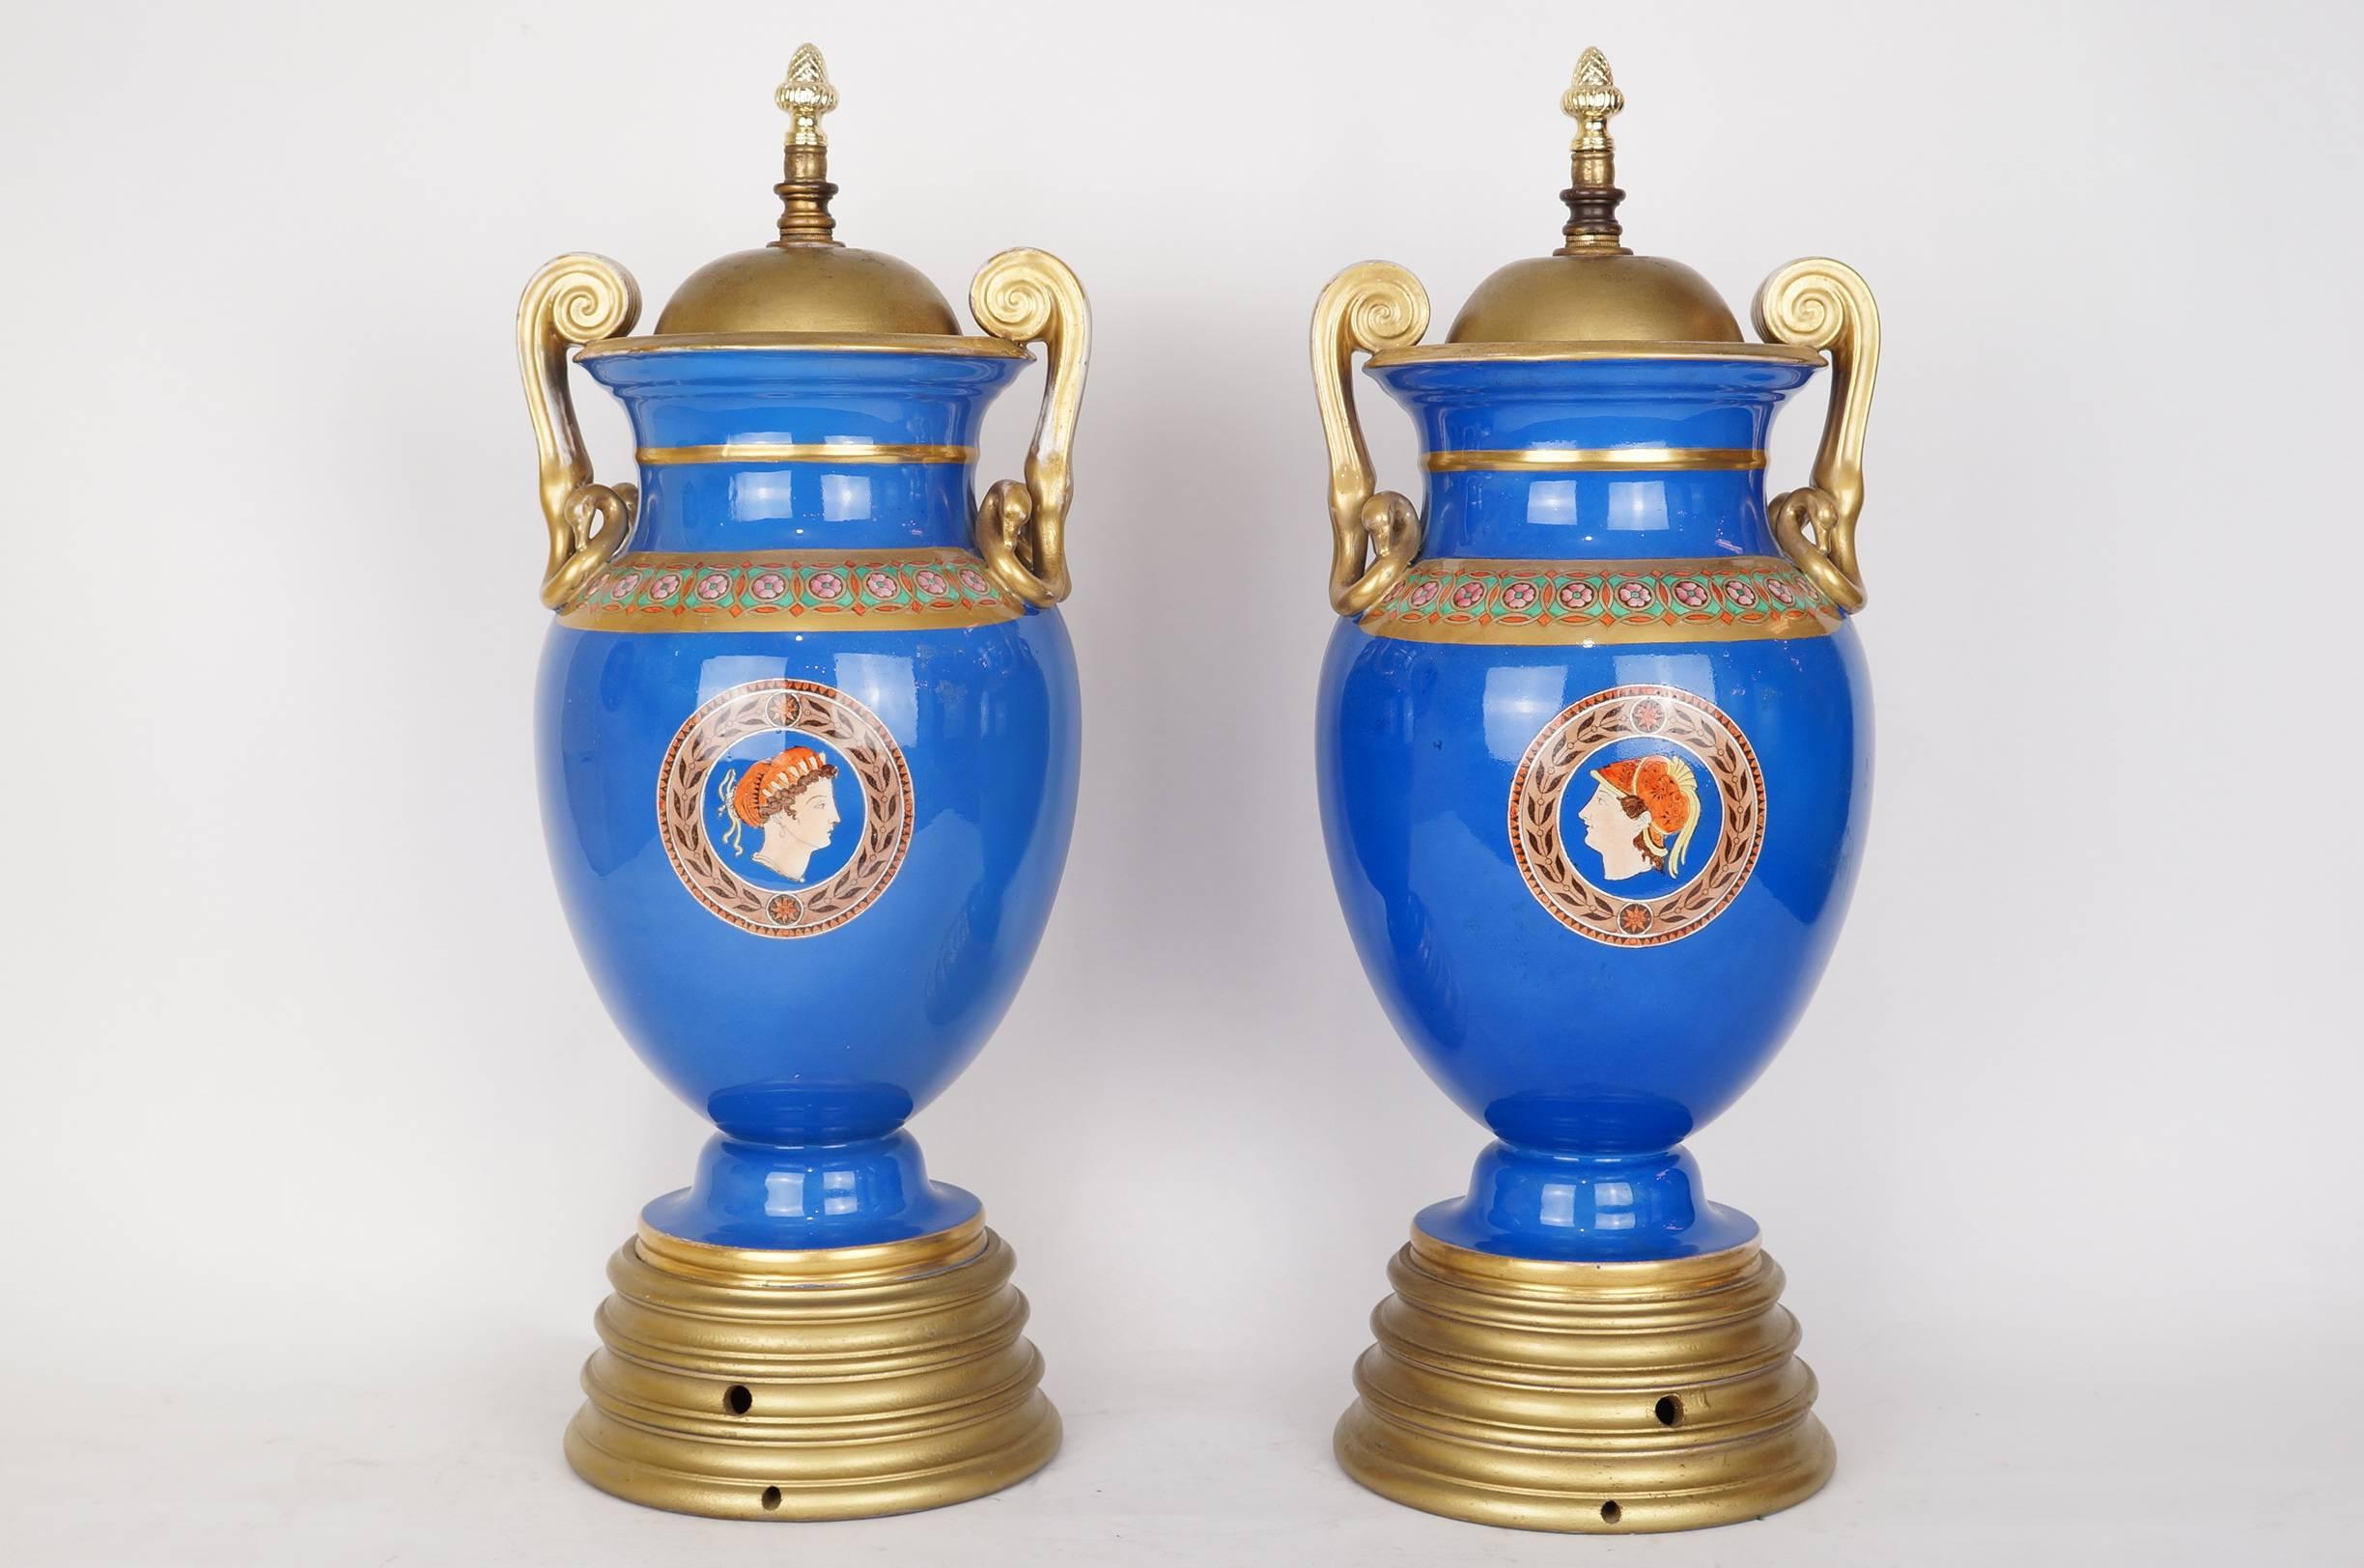 Pair of Neoclassical Painted Blue Porcelain Lamp Bases with Chariots Scenes on Round Gilt Bases
Stock Number: L378